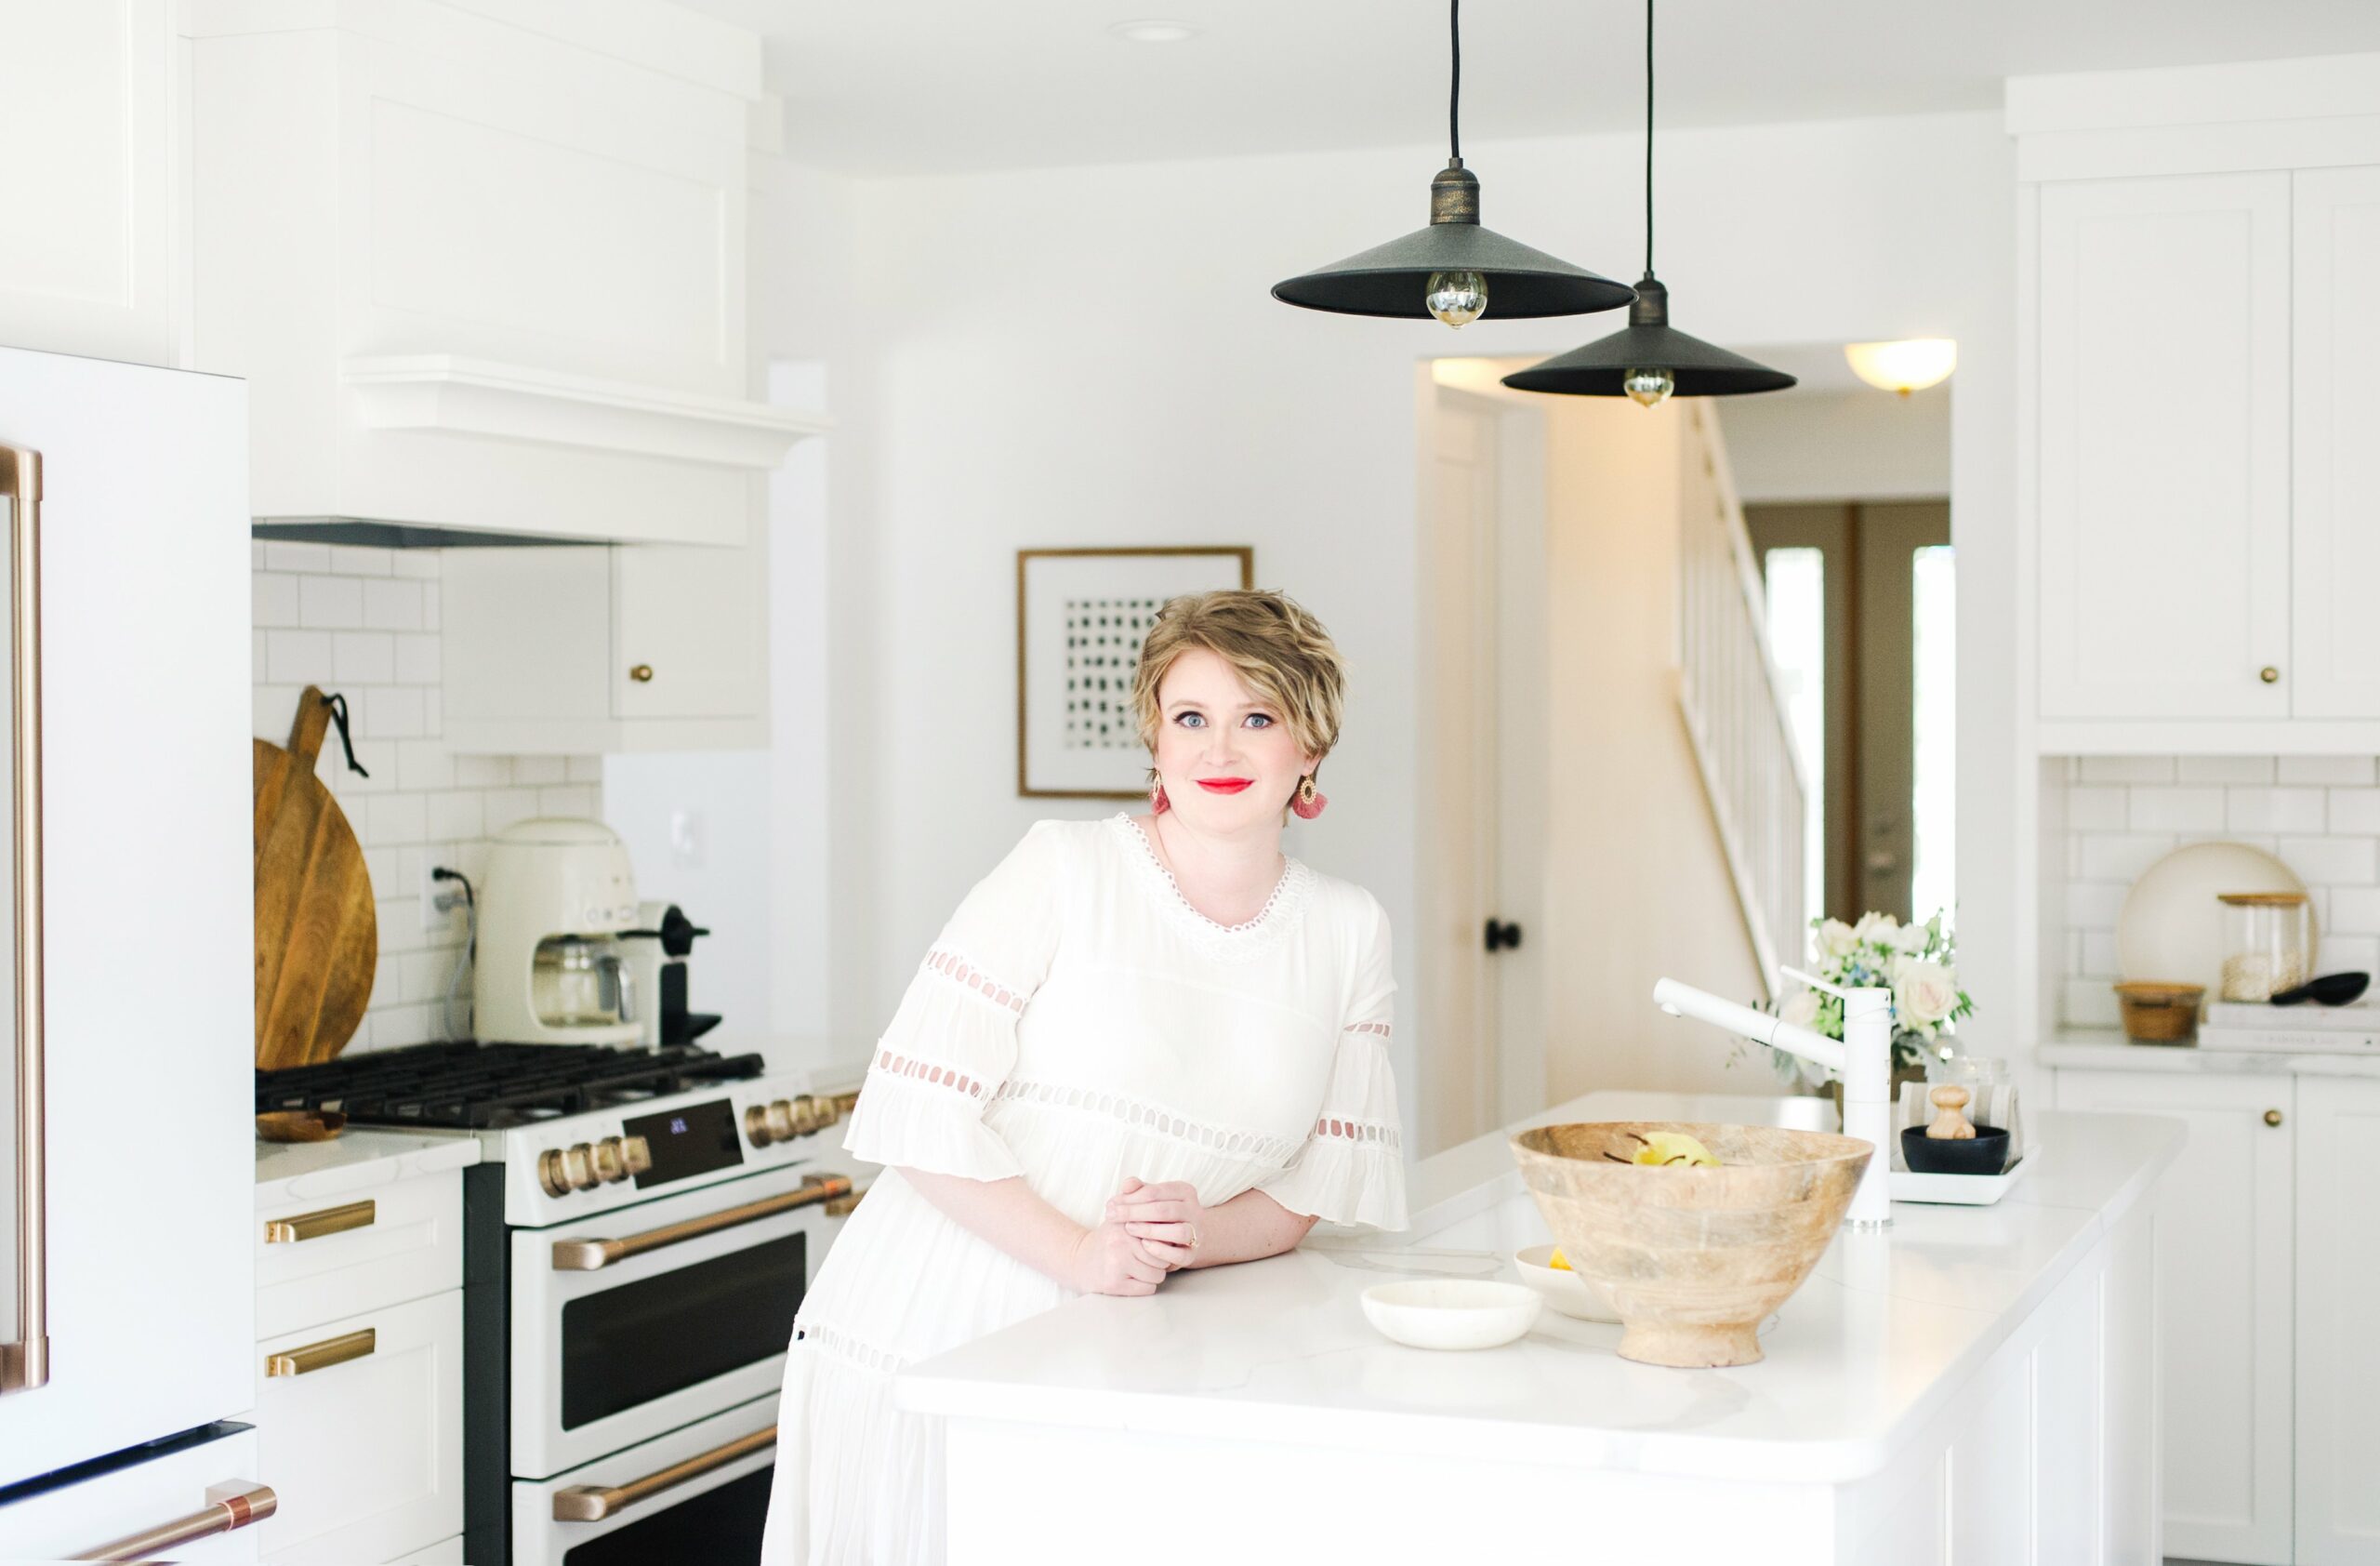 Markie Tuckett, owner of Timber + Plumb Kitchens and Cabinetry